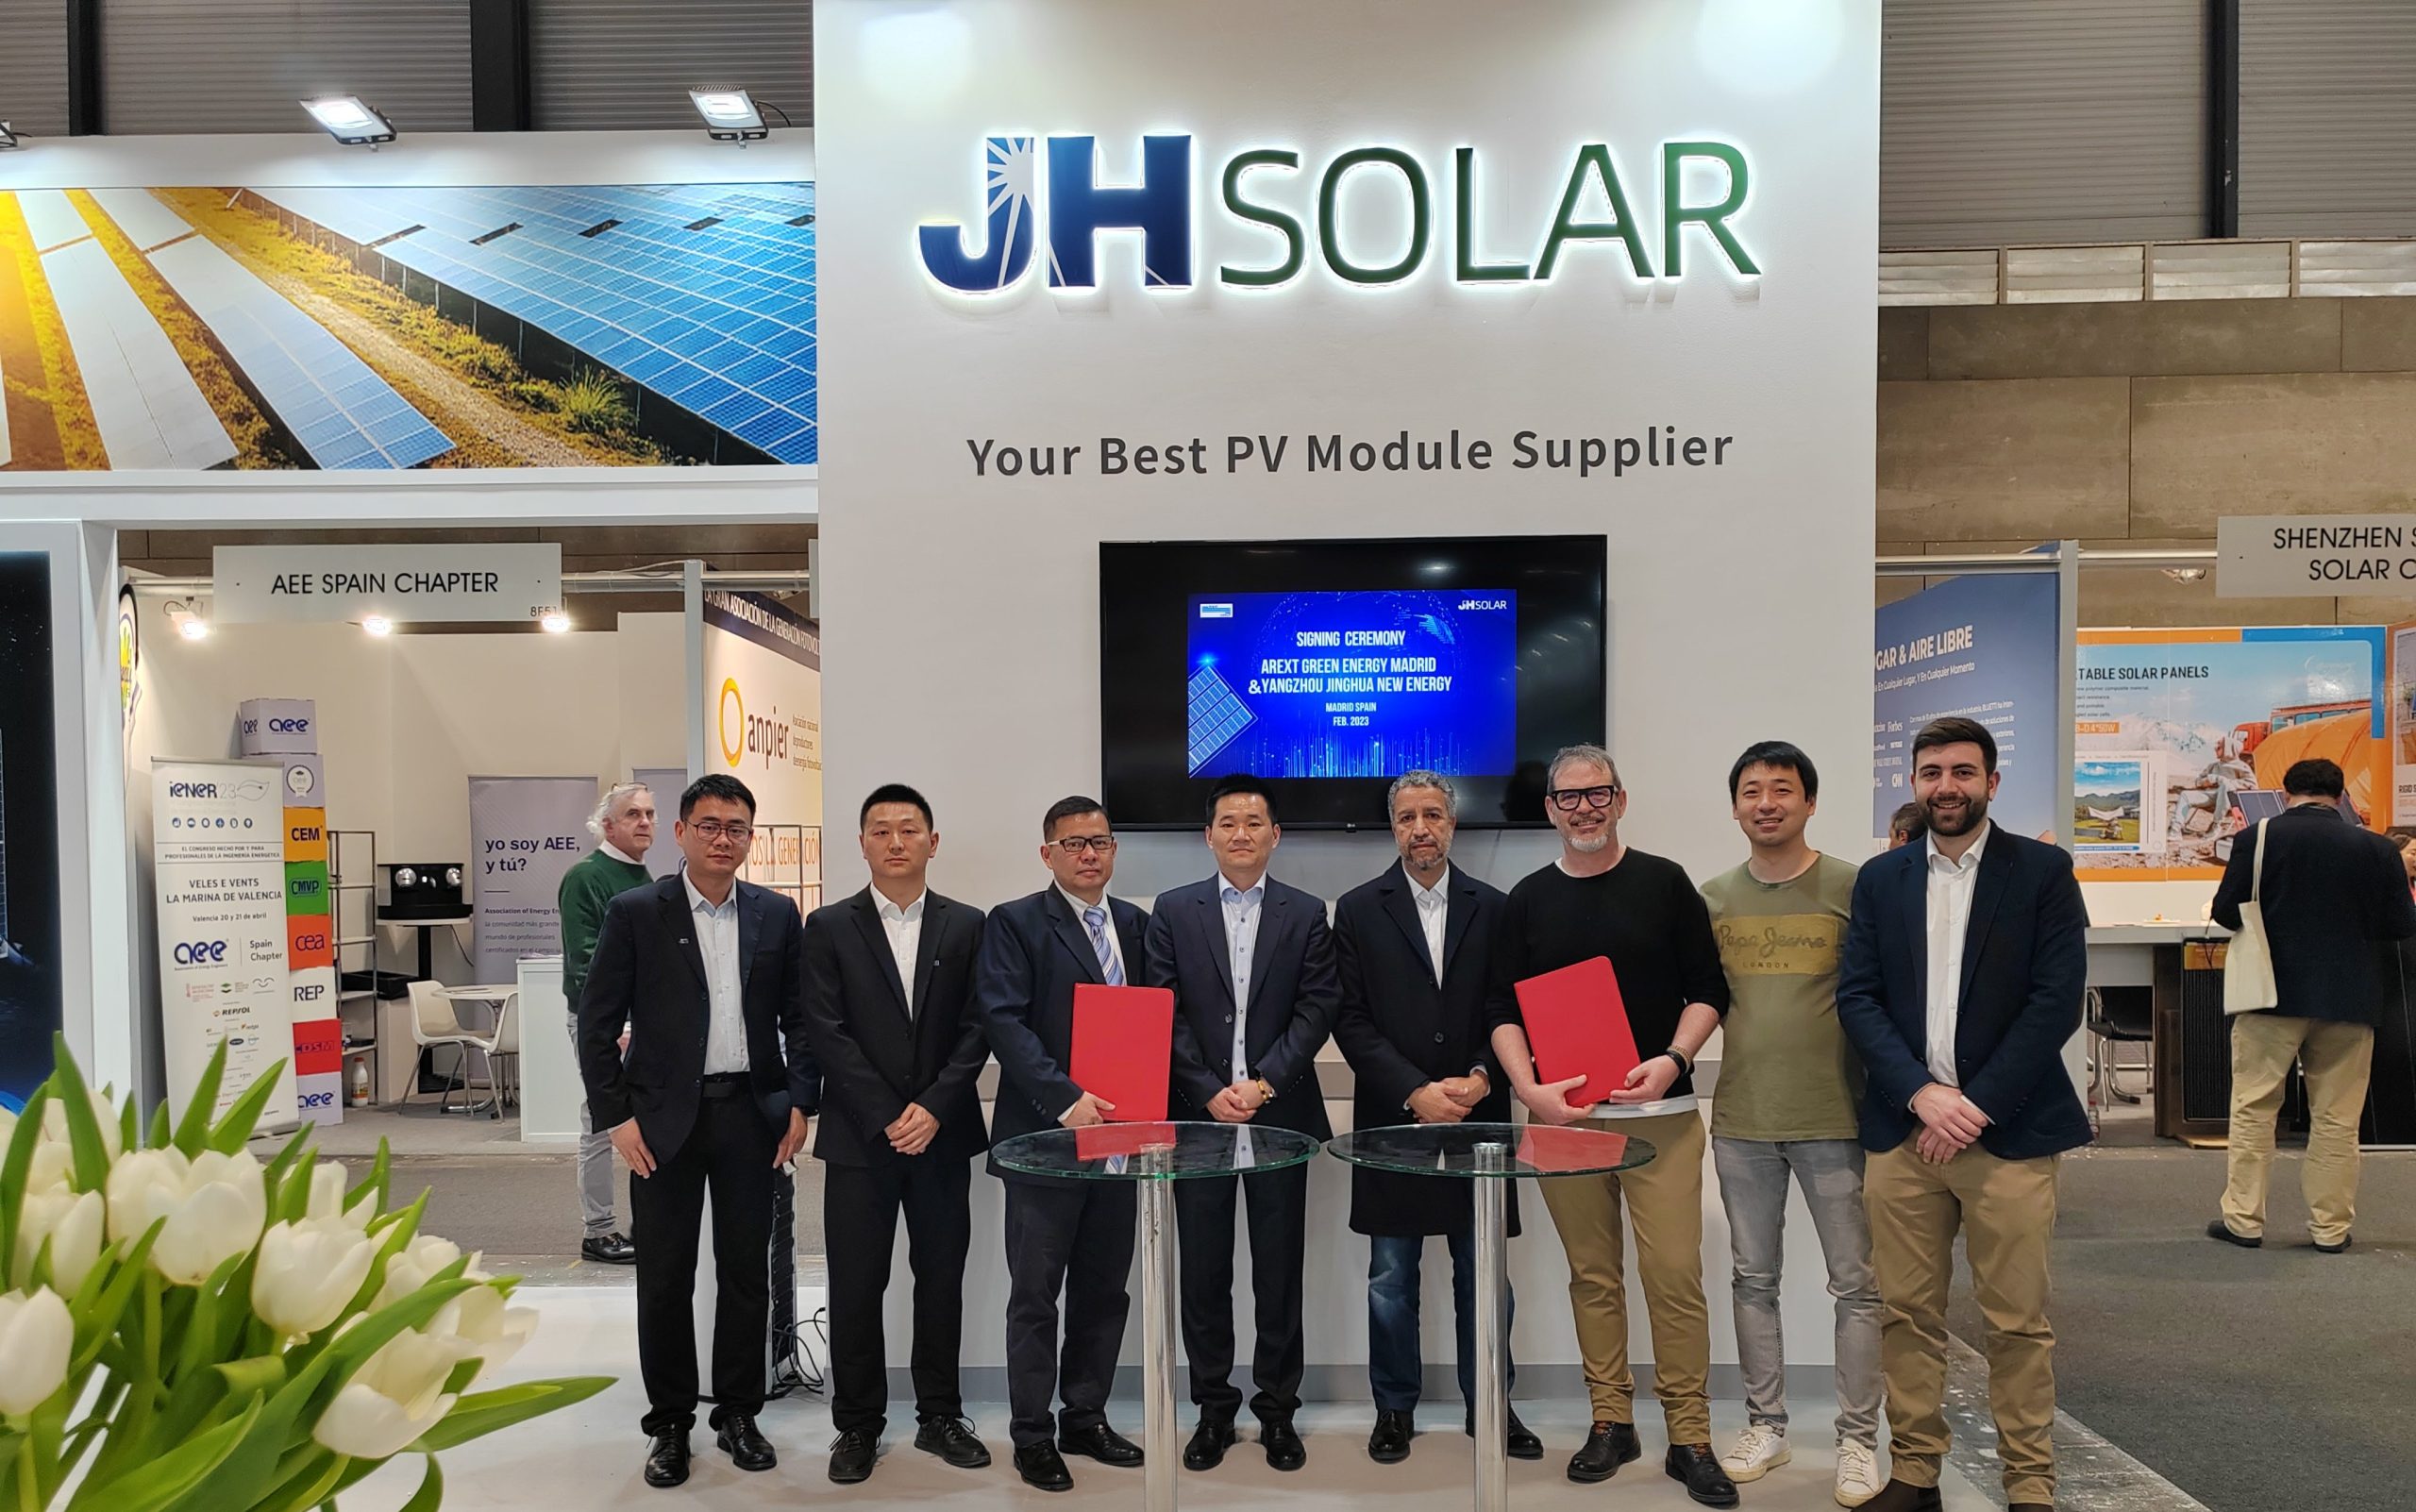 JH Solar entered into a cooperation agreement with Arext Green Energy | Solarbe Global